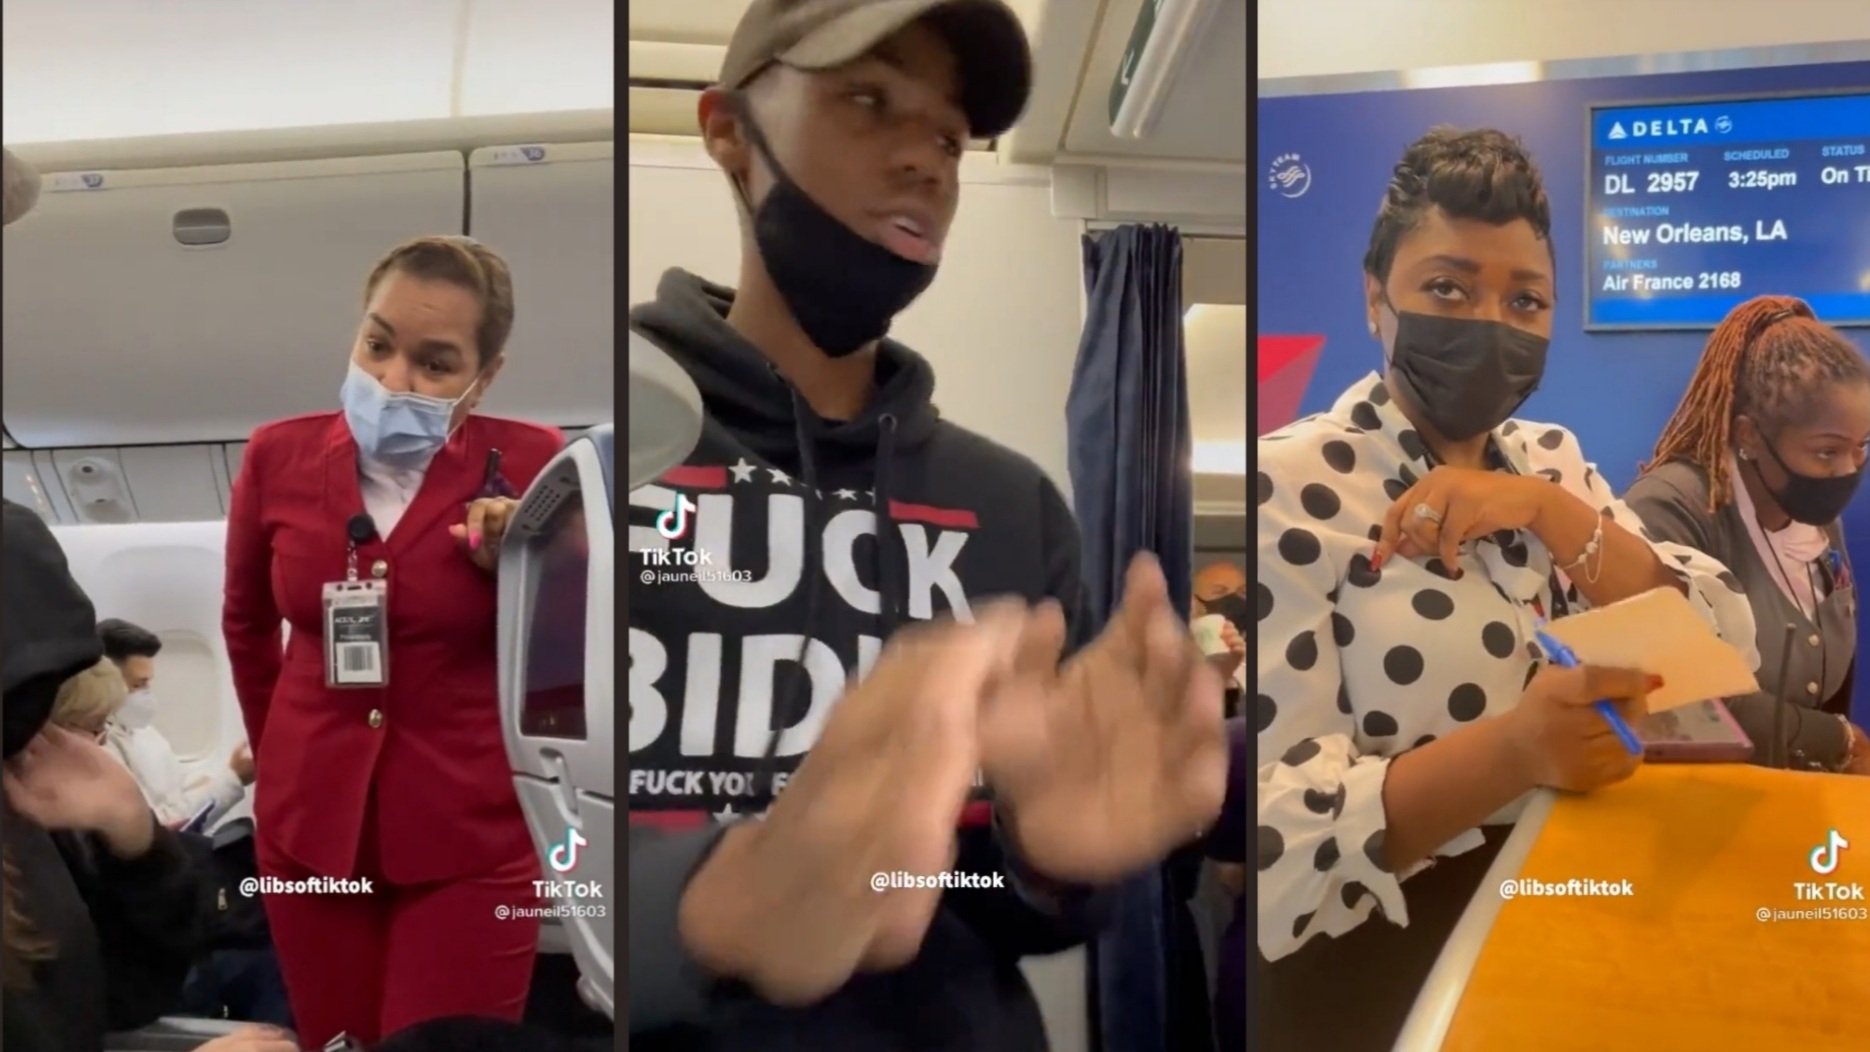  Compliance Is Not Enough: Delta Flight Attendants Threaten Man for Wearing a “F*ck Biden” Hoodie – Then After He Removes it, They Kick Him Off Anyway (VIDEO)